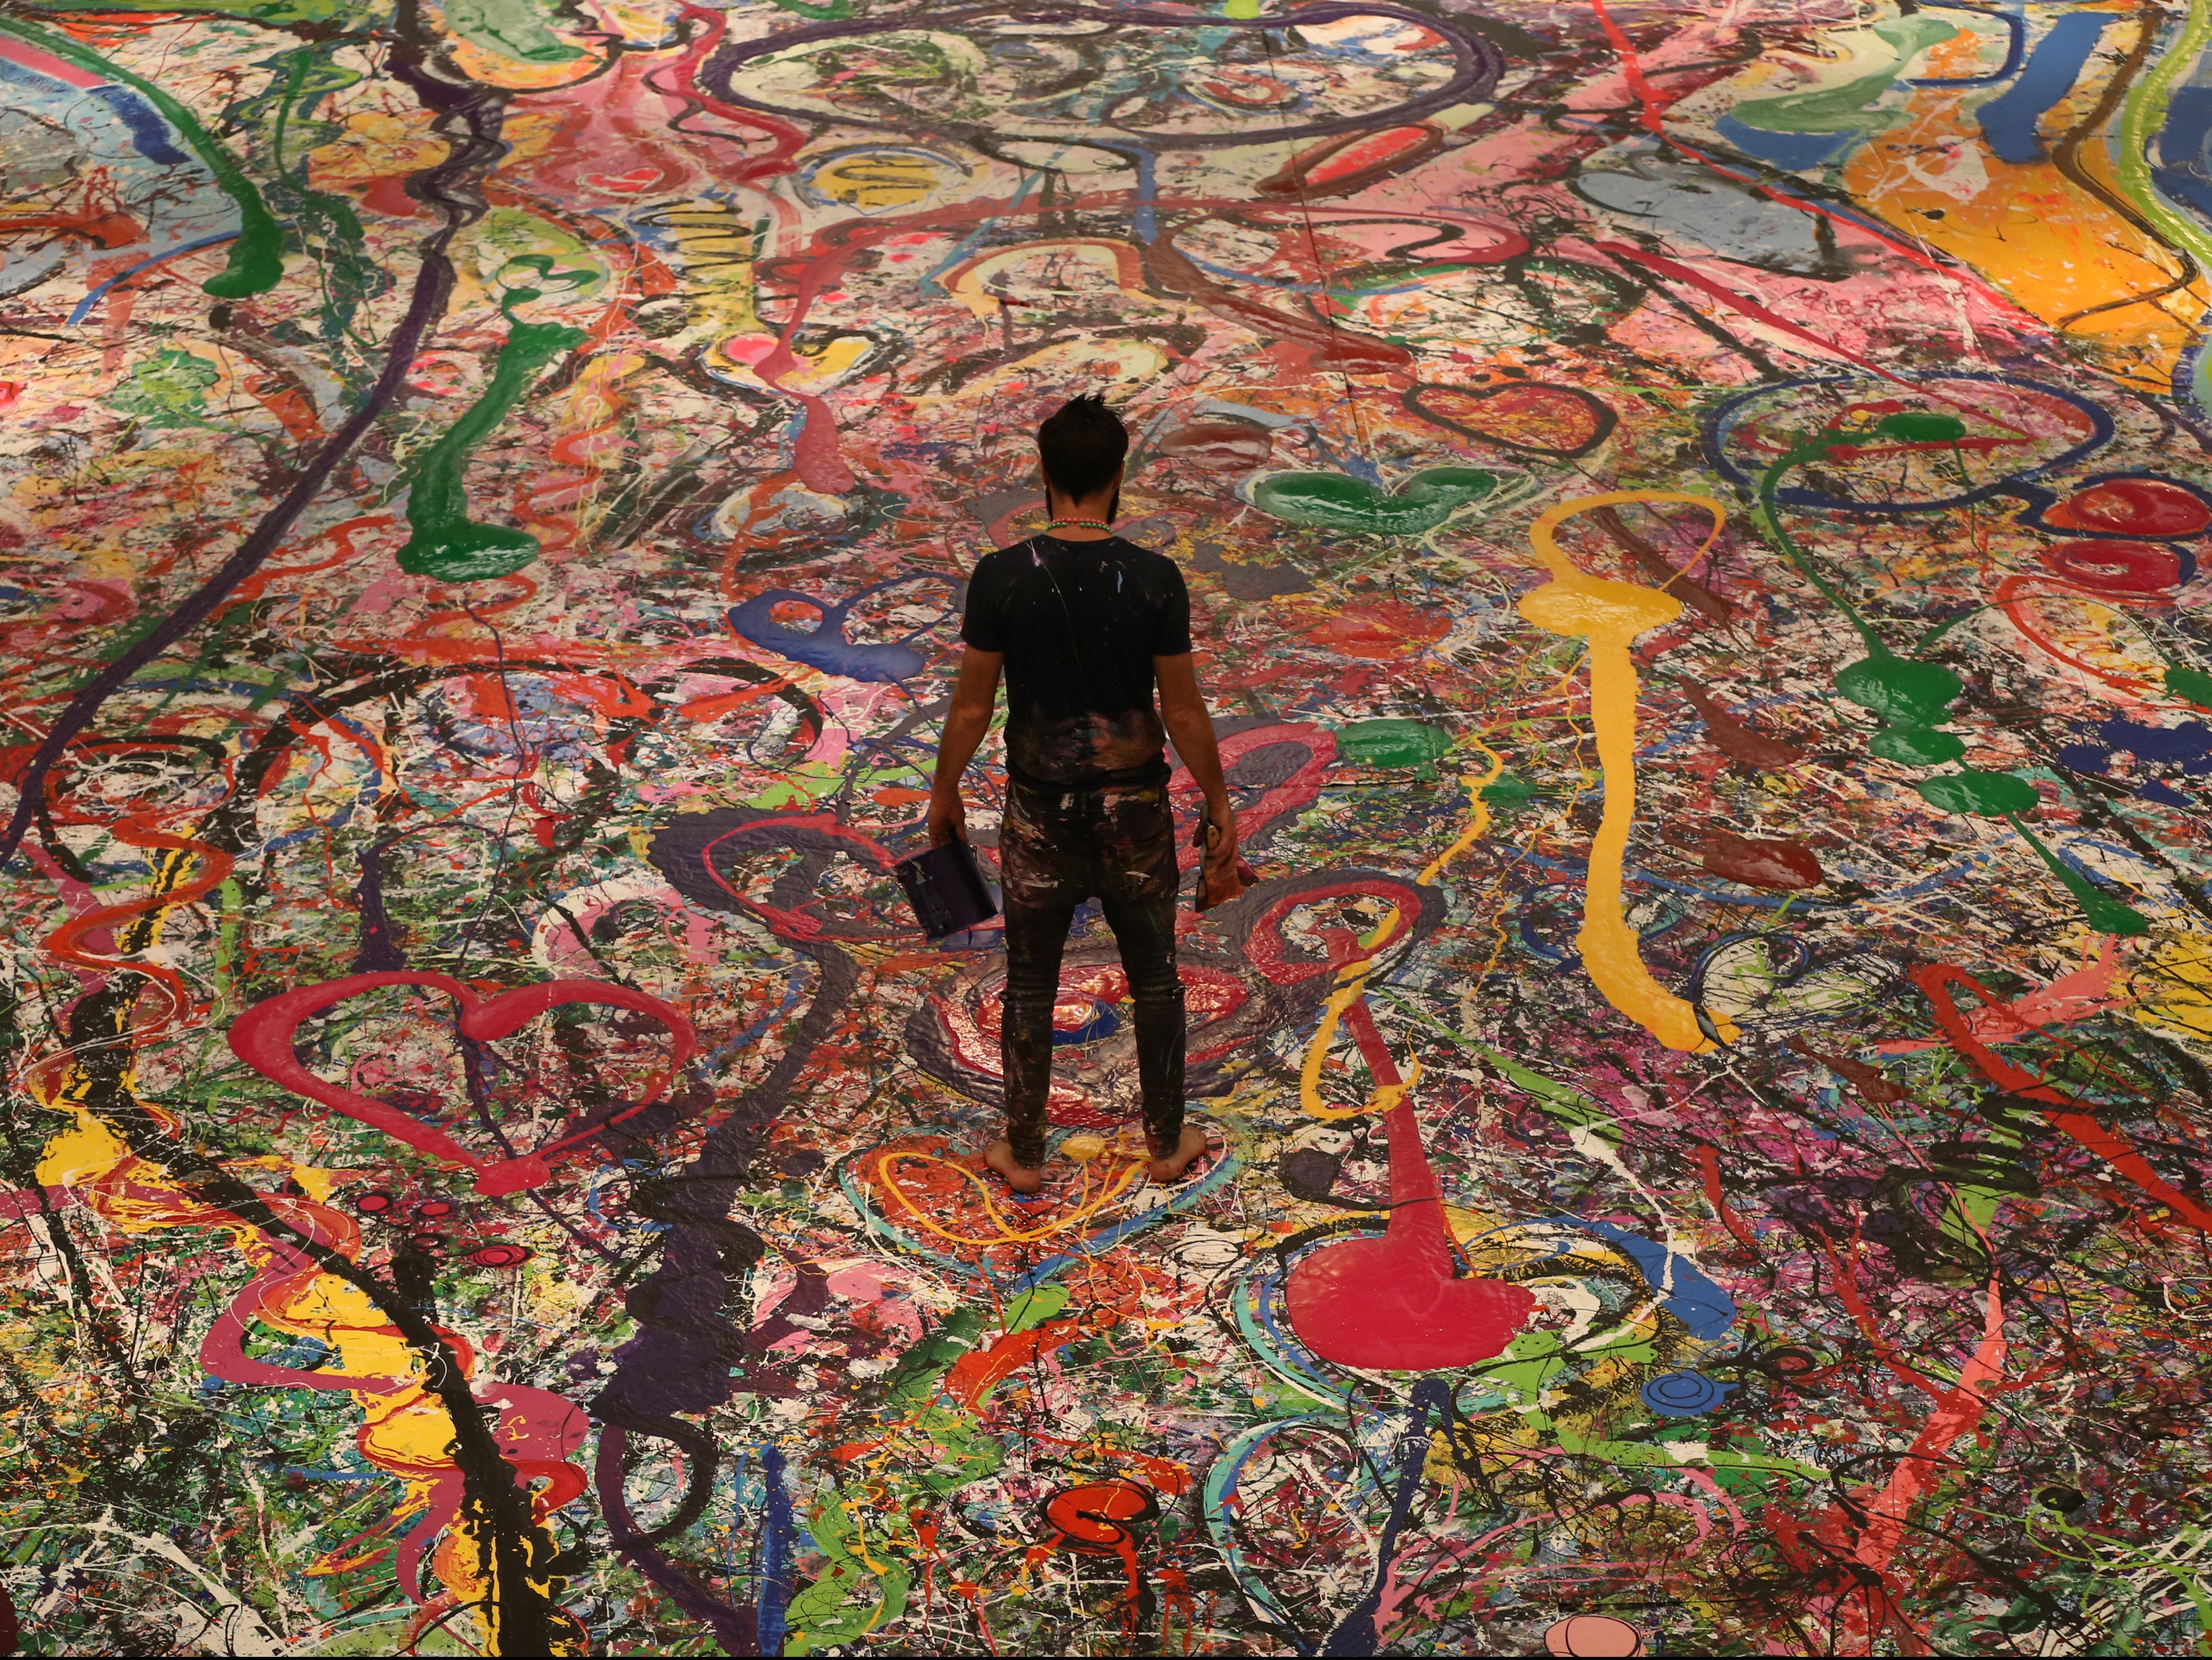 Sacha Jafri finishes work on the world’s largest painting, the Journey of Humanity